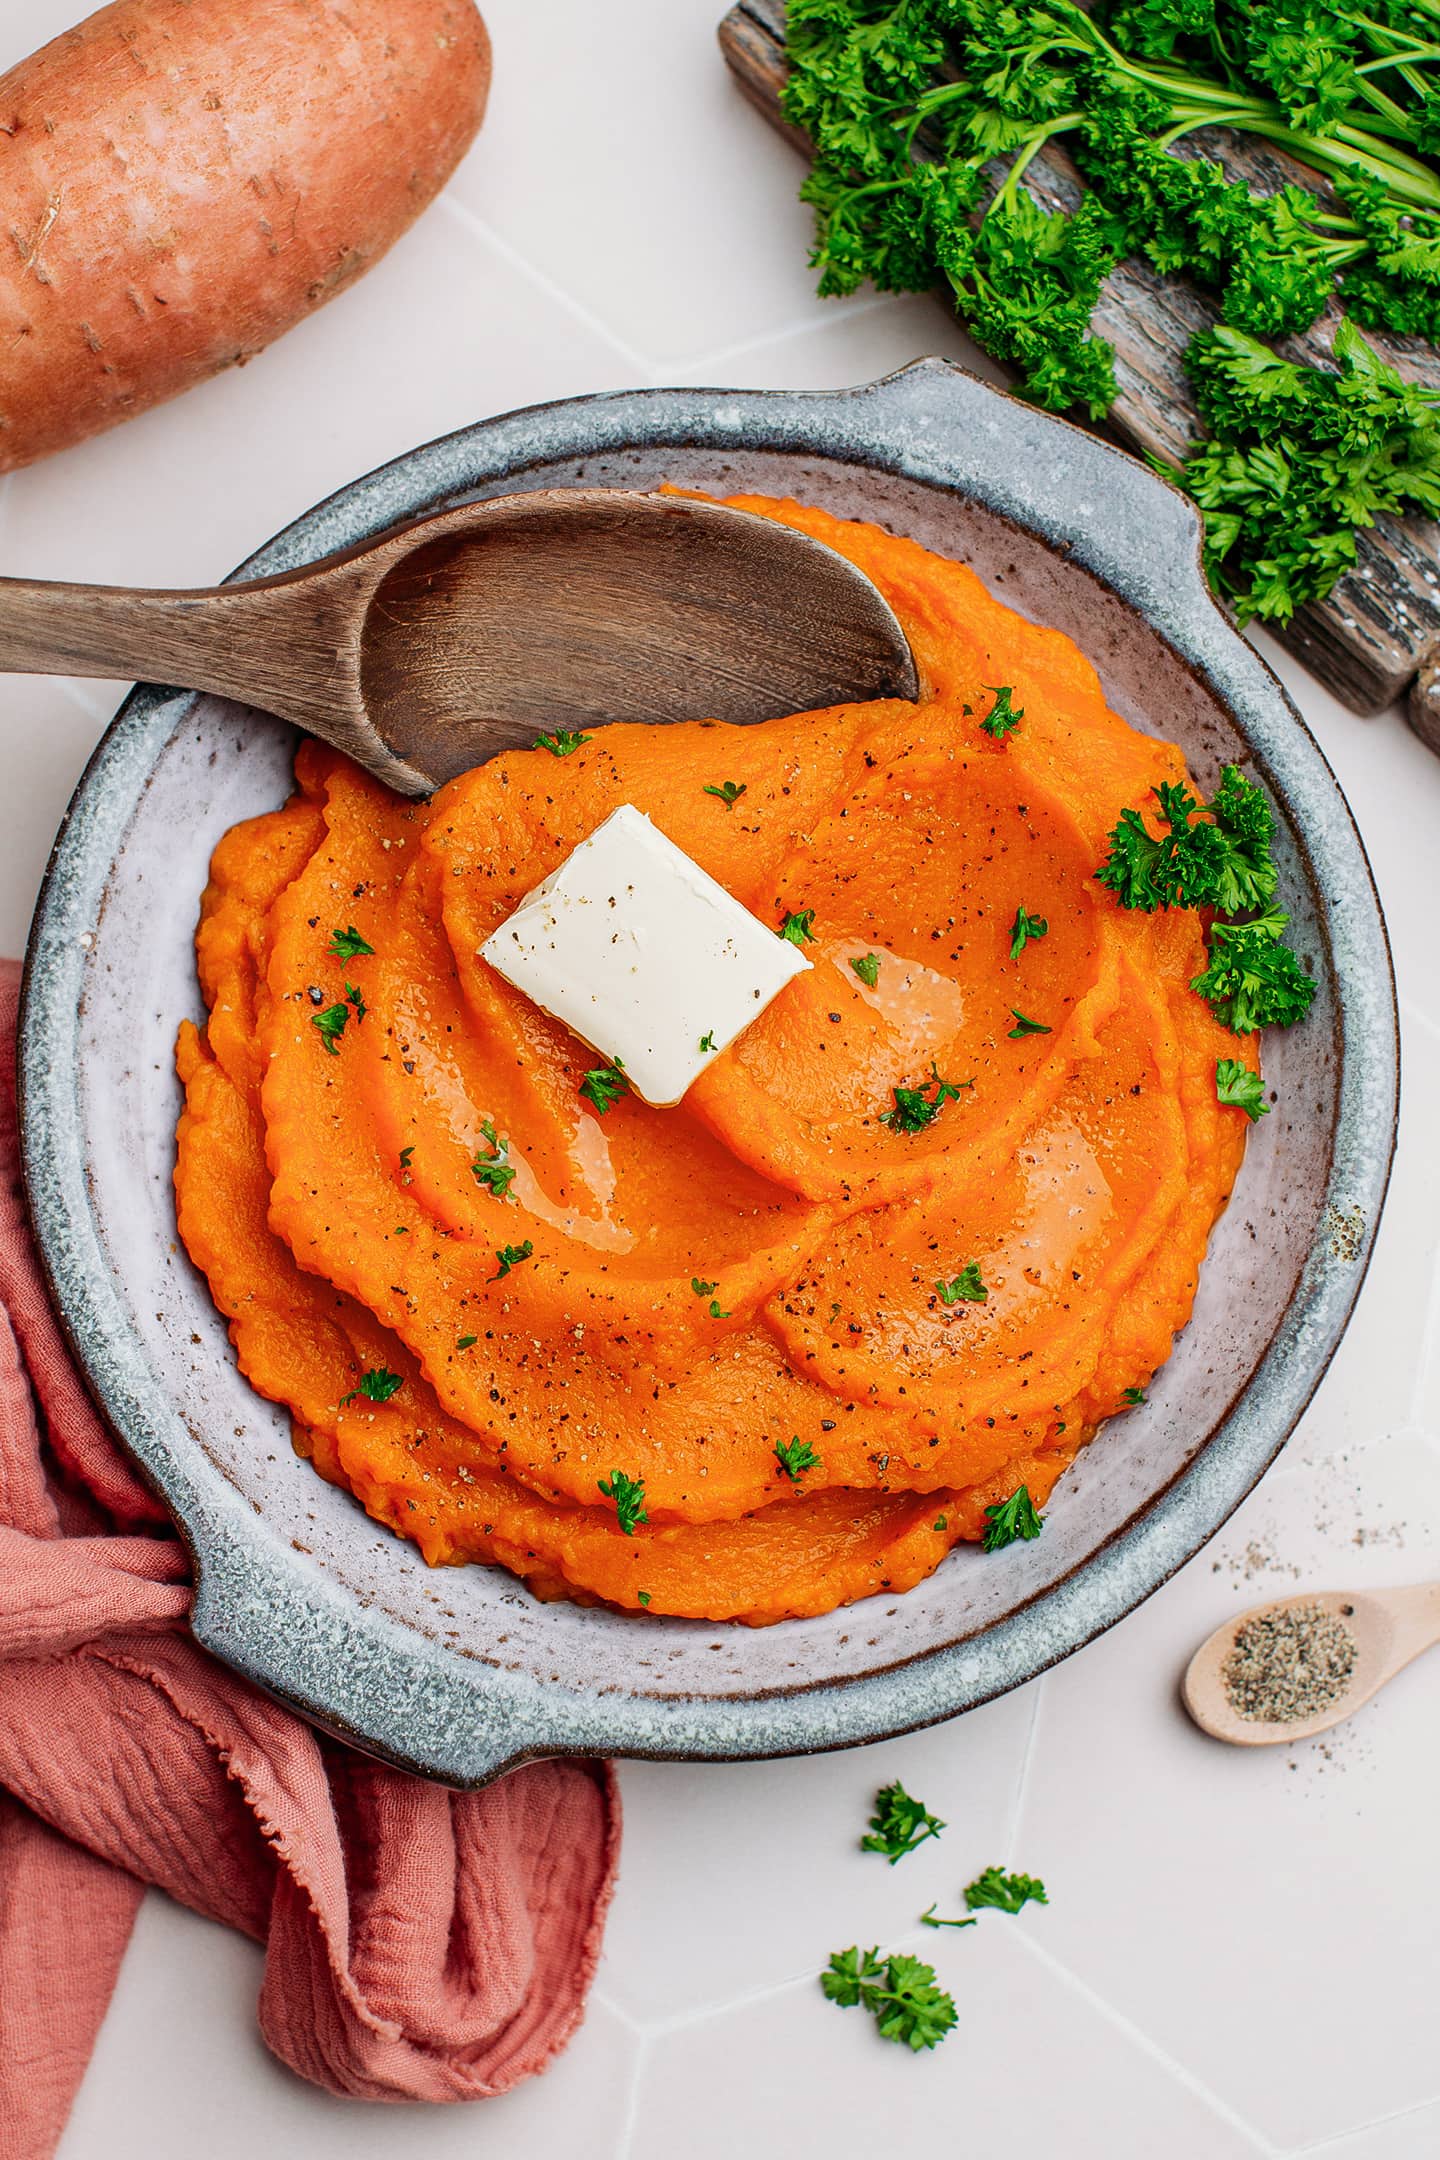 Mashed sweet potatoes topped with butter and parsley.